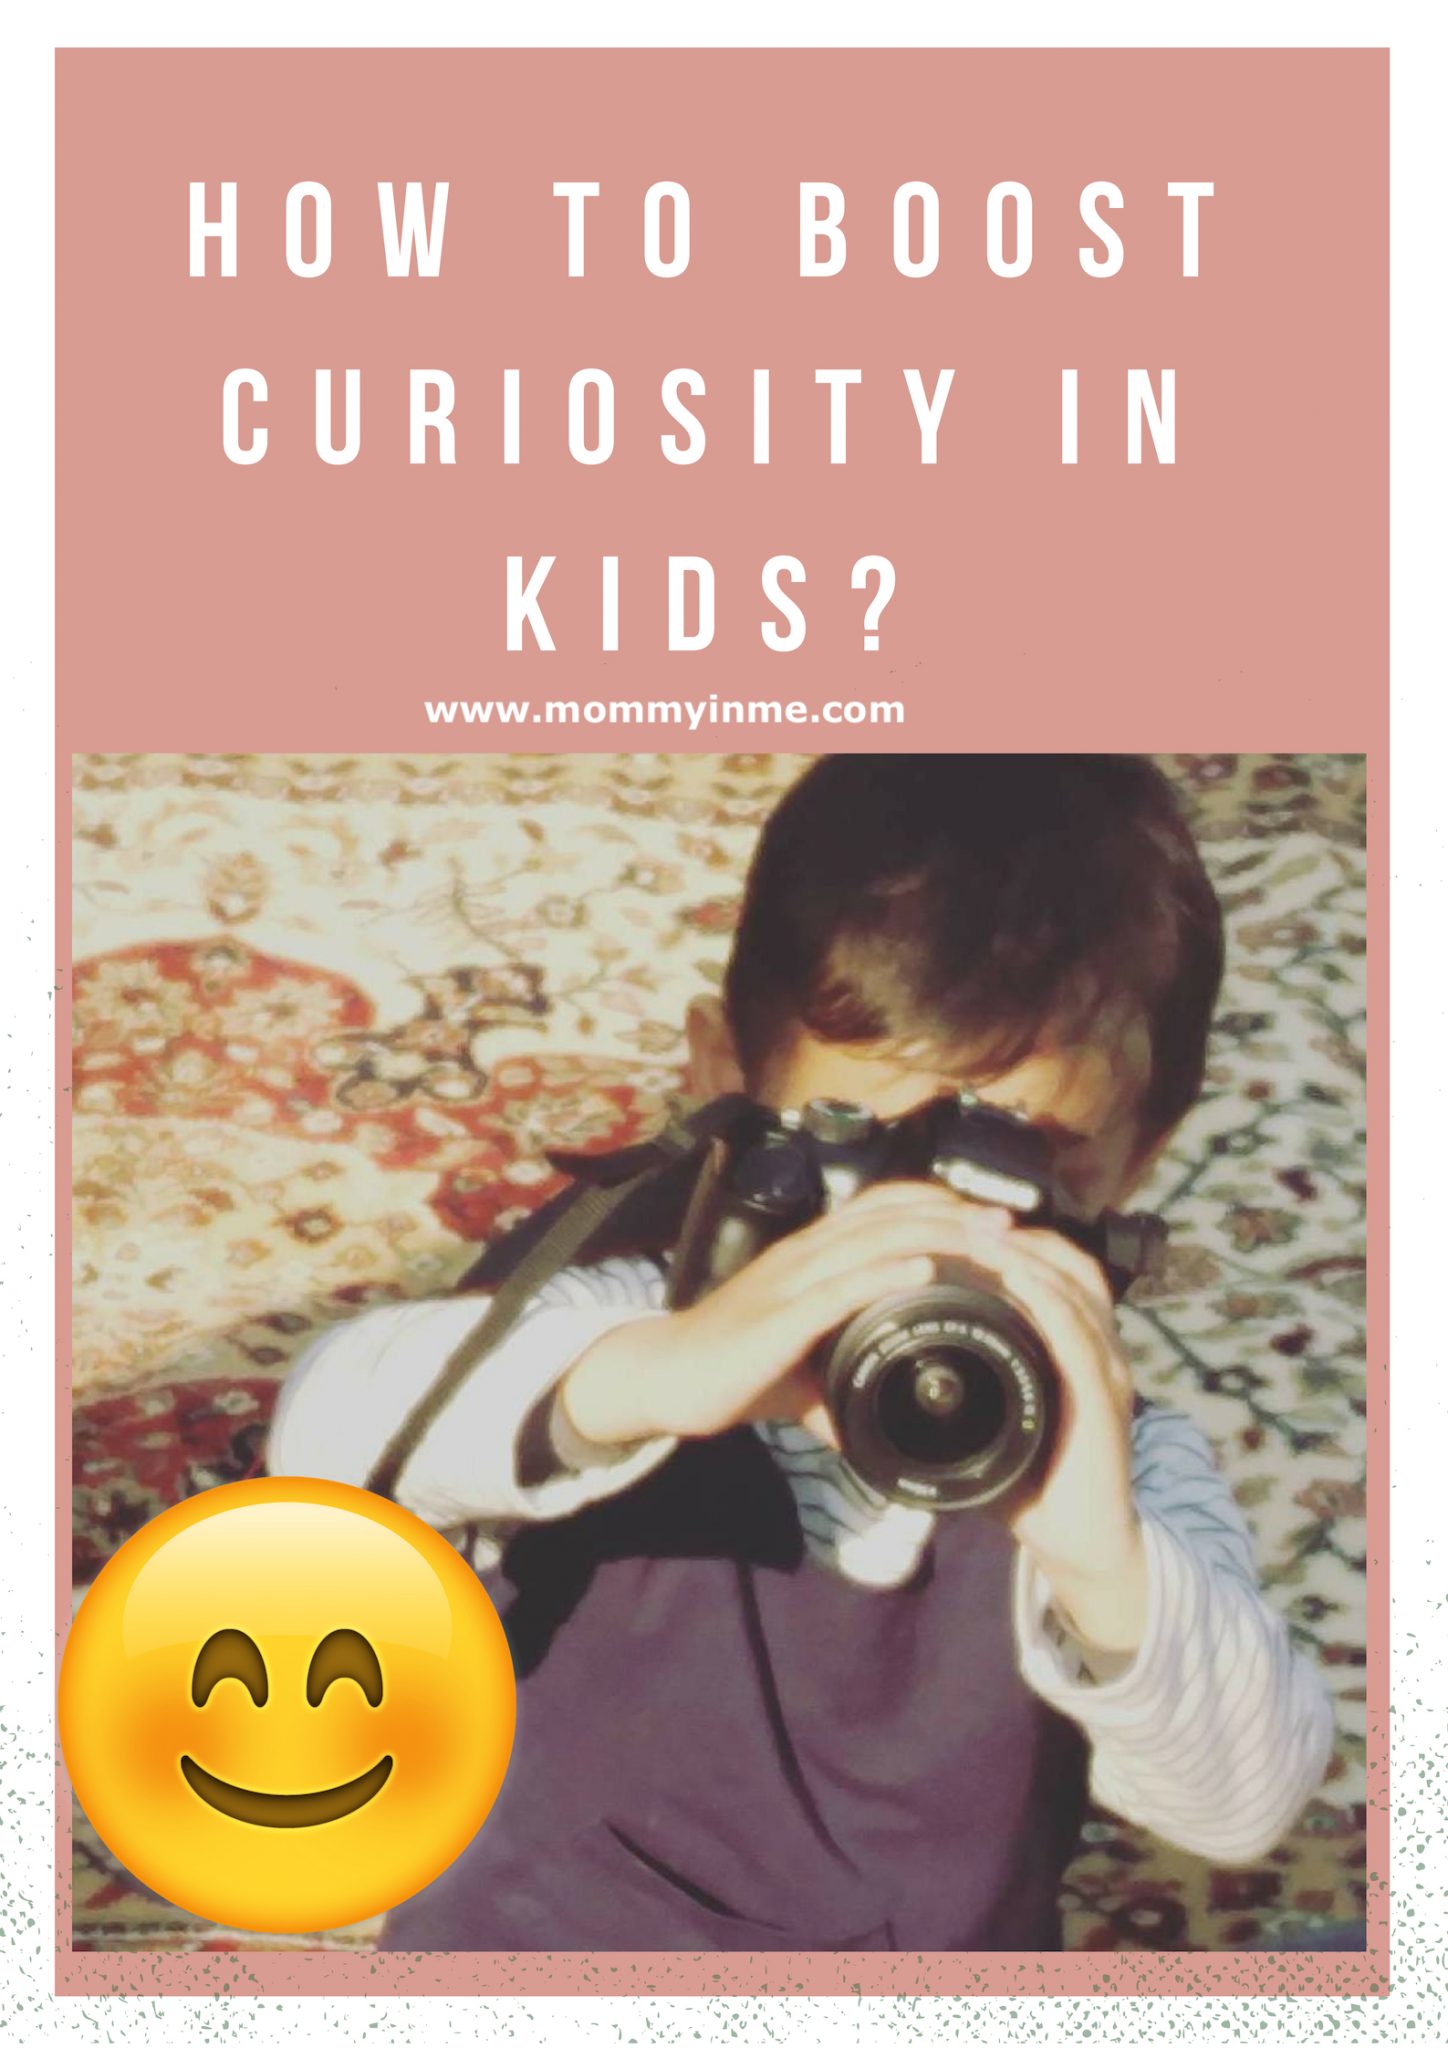 Are you blessed with Curious child? You're lucky as curiosity is the path to the most important learnings in a child's life. Here are 5 tips to help you - How to boost child's curiosity. #inquisitive #raisingchildren #curiouskids #development #parenting #parentingtip 